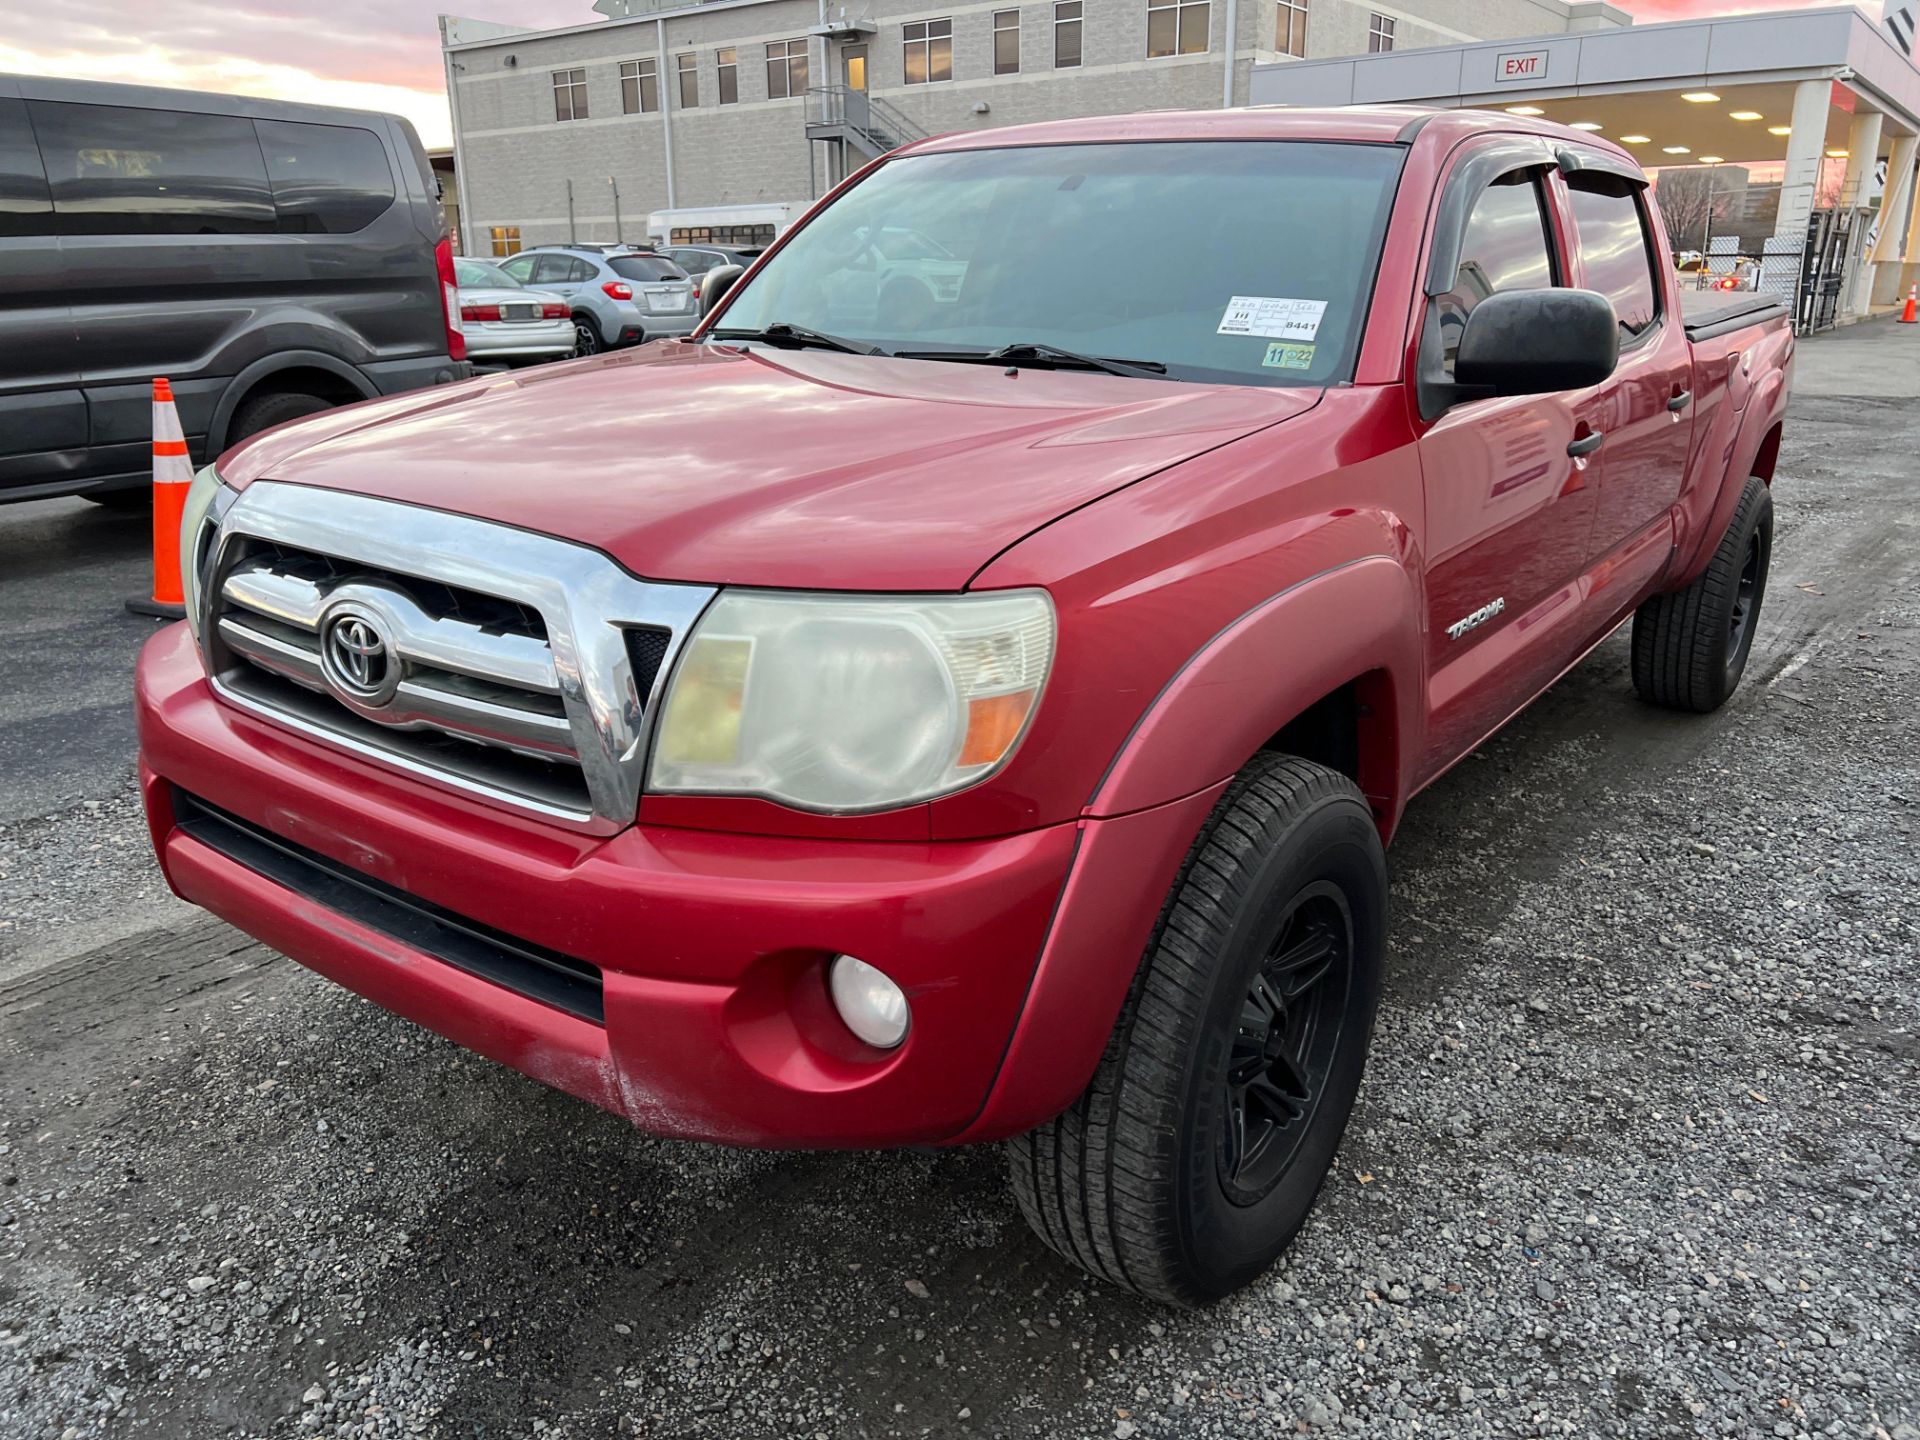 2009 Toyota Tacoma TRD Sport 4x4 Pickup Truck - Image 2 of 16